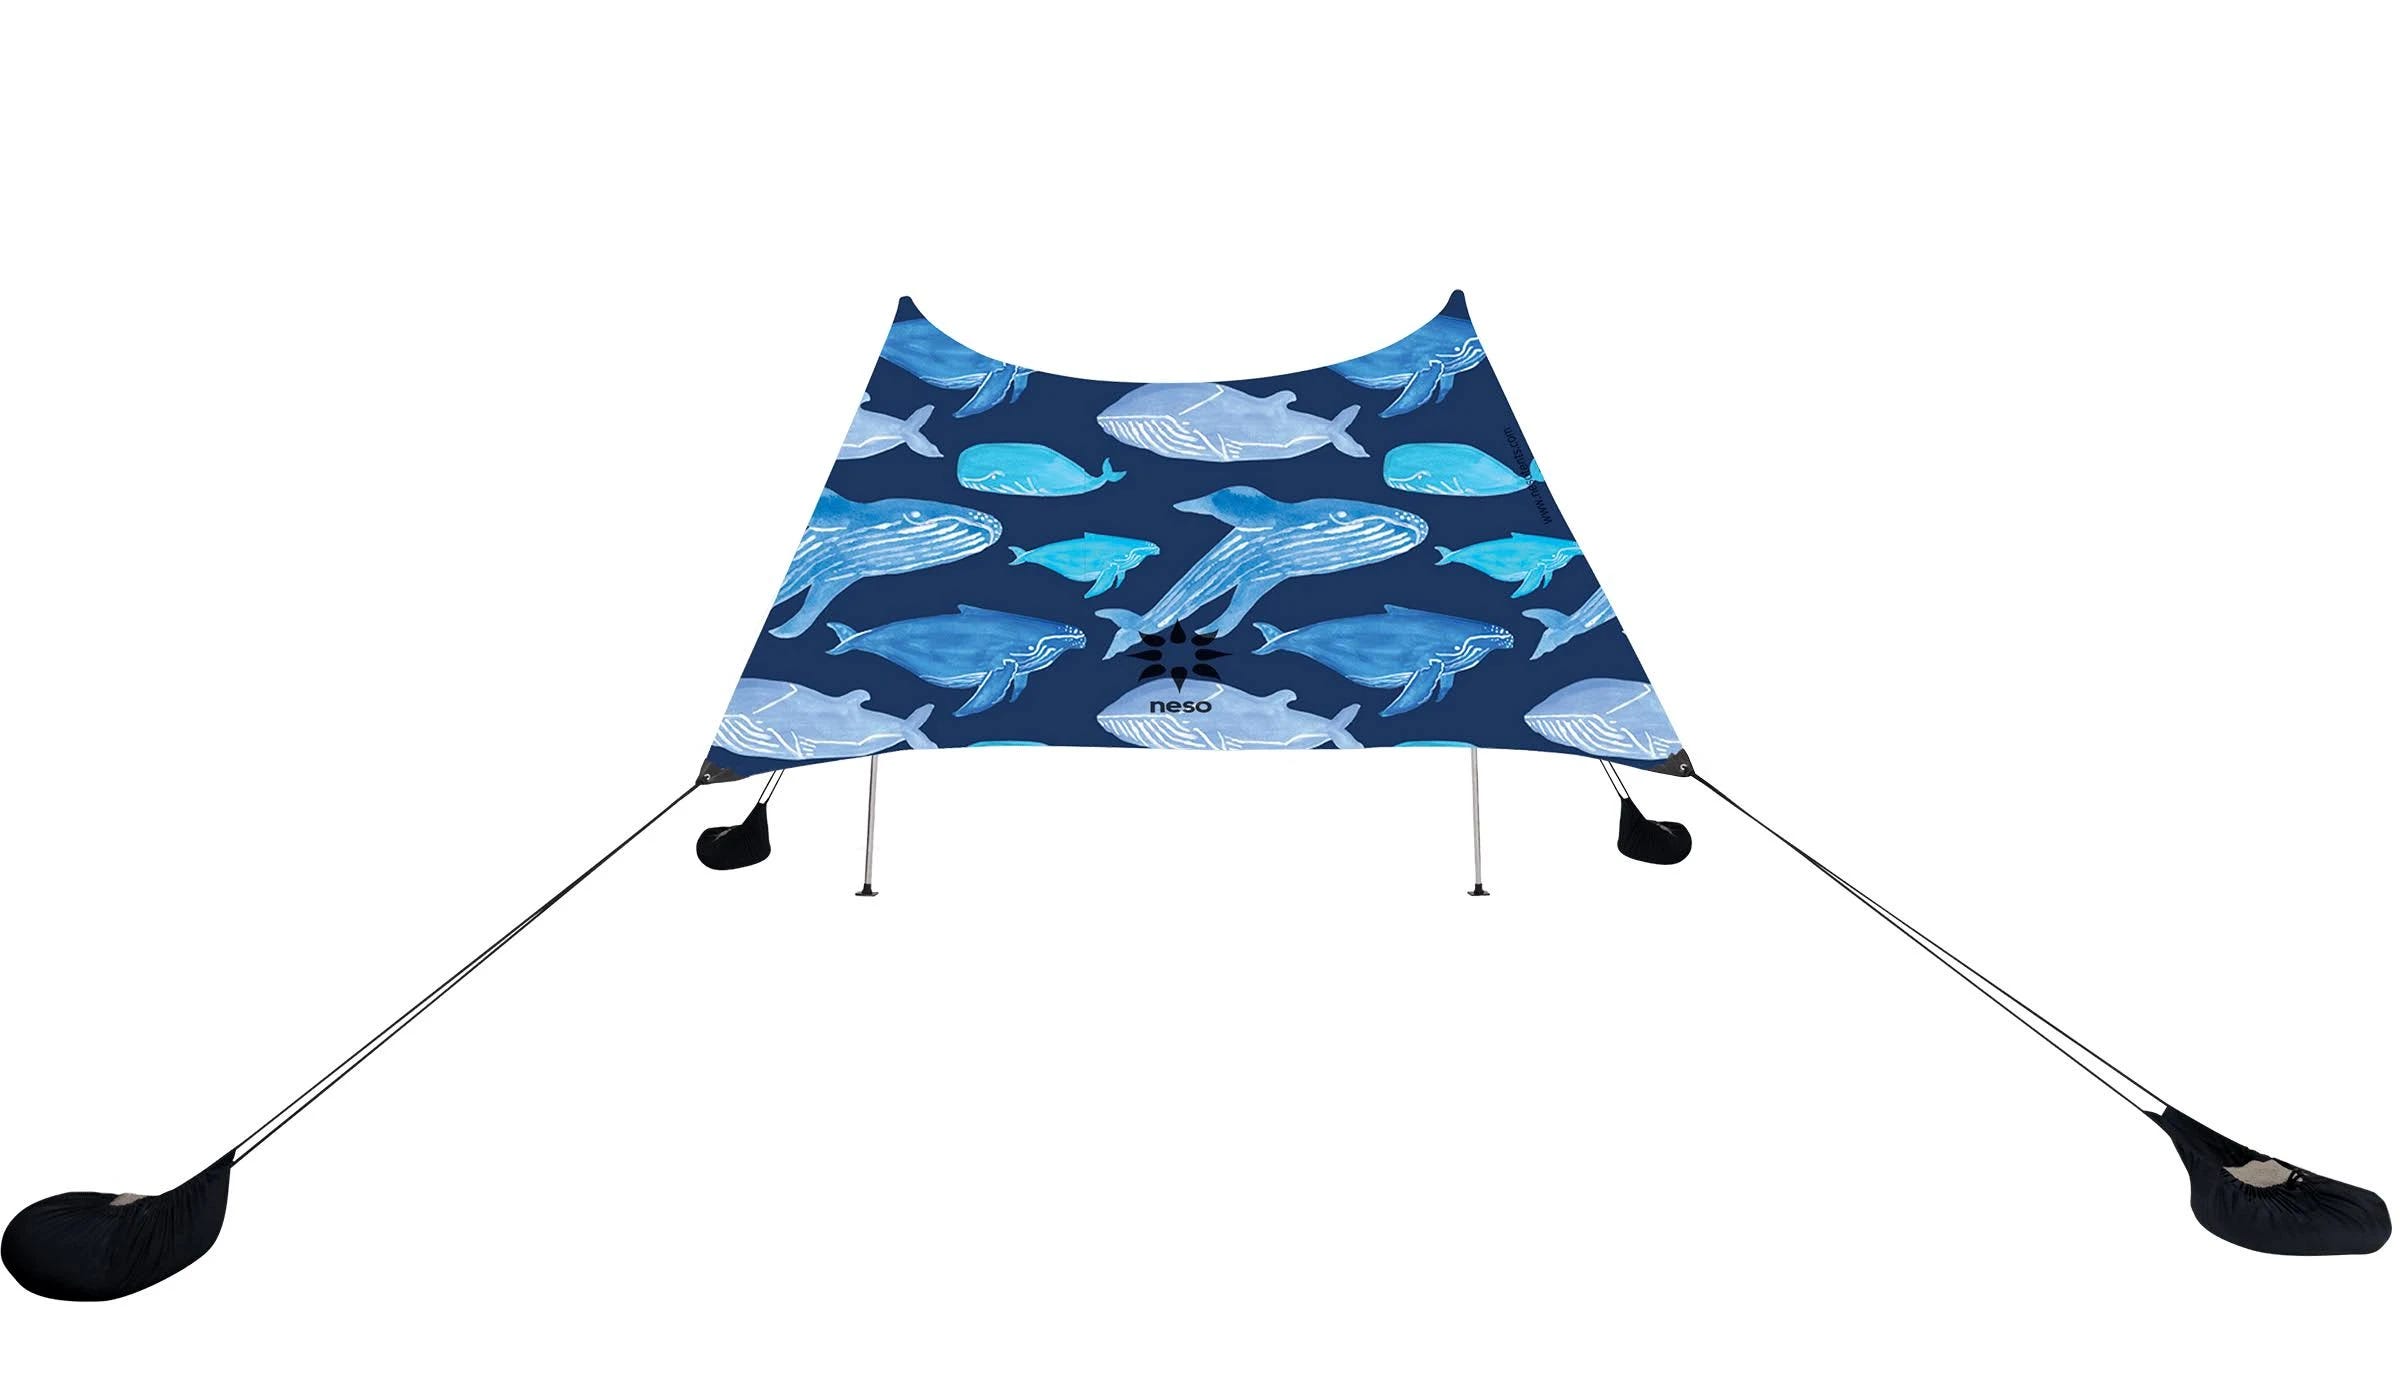 Neso Gigante Large Beach Tent: Waterproof and UPF 50+ Protection for Your Fun Days | Image